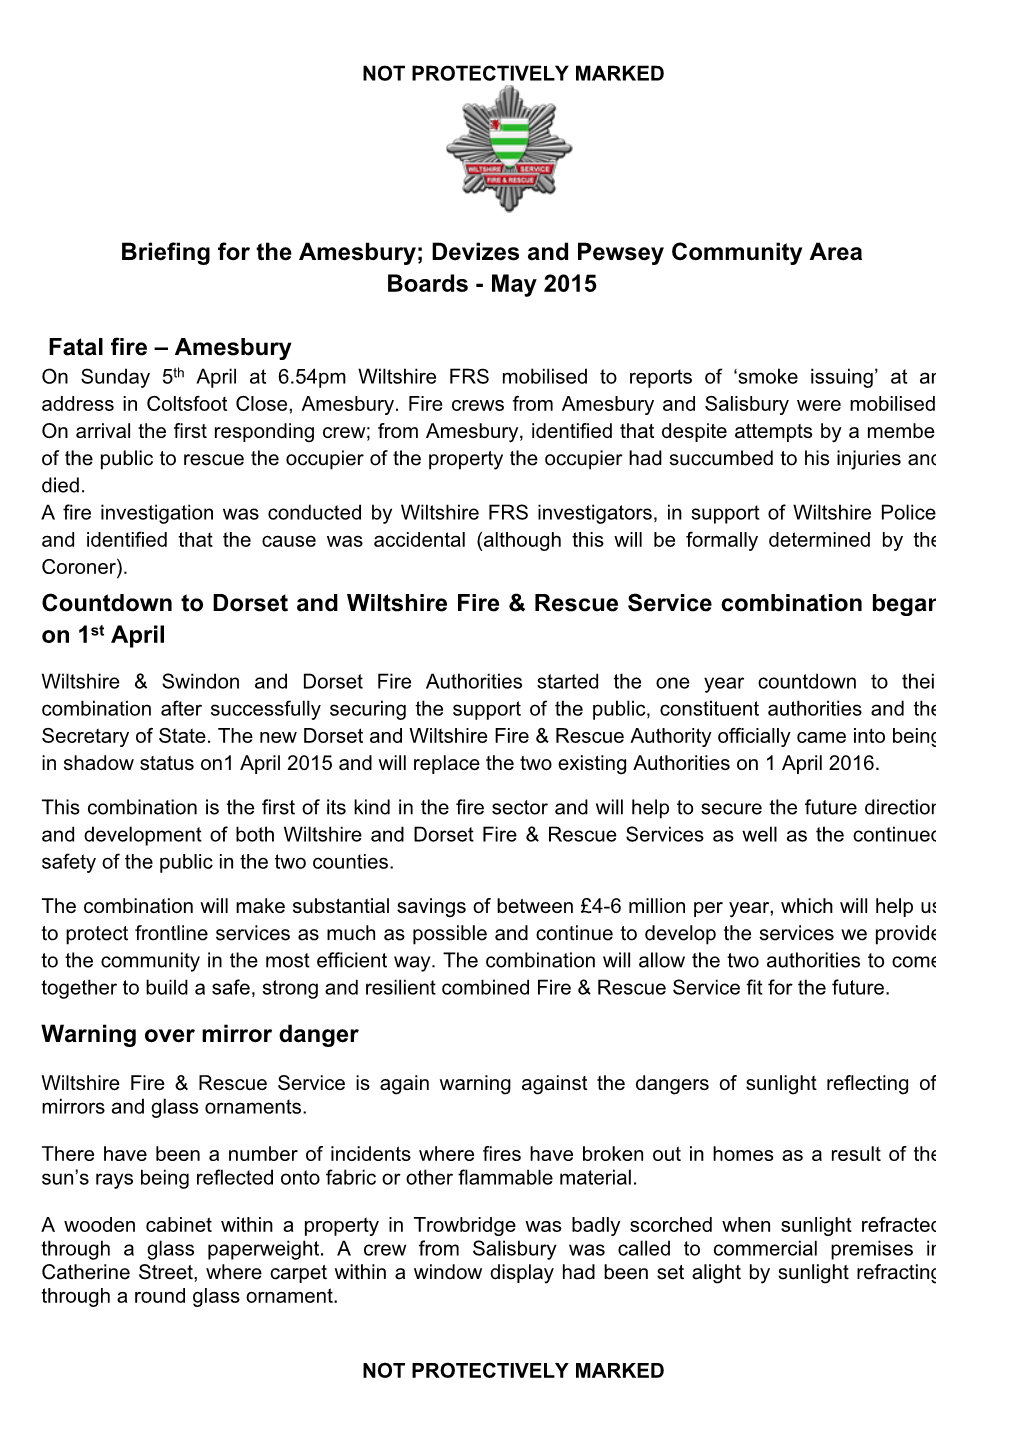 Briefing for the Amesbury; Devizes and Pewsey Community Area Boards - May 2015